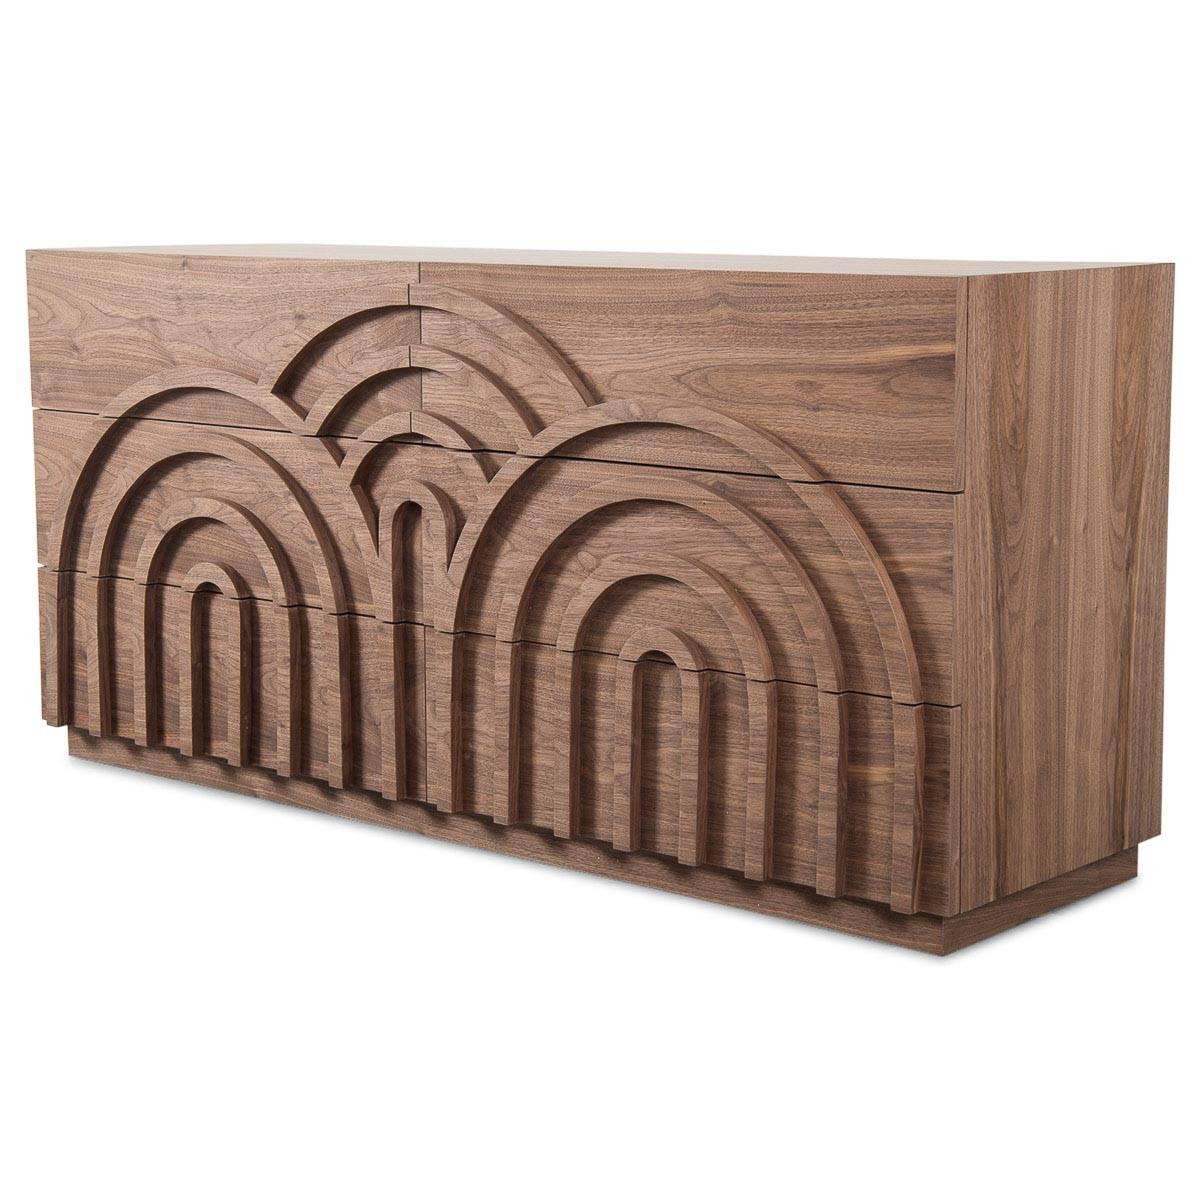 Modern twist on the Classic Art Deco styling shown through arches across the dresser. Elegant and symmetrical, the Art Deco dresser shows off its style and sophistication through its six-drawer doors and its walnut finish.

Dimensions:

60